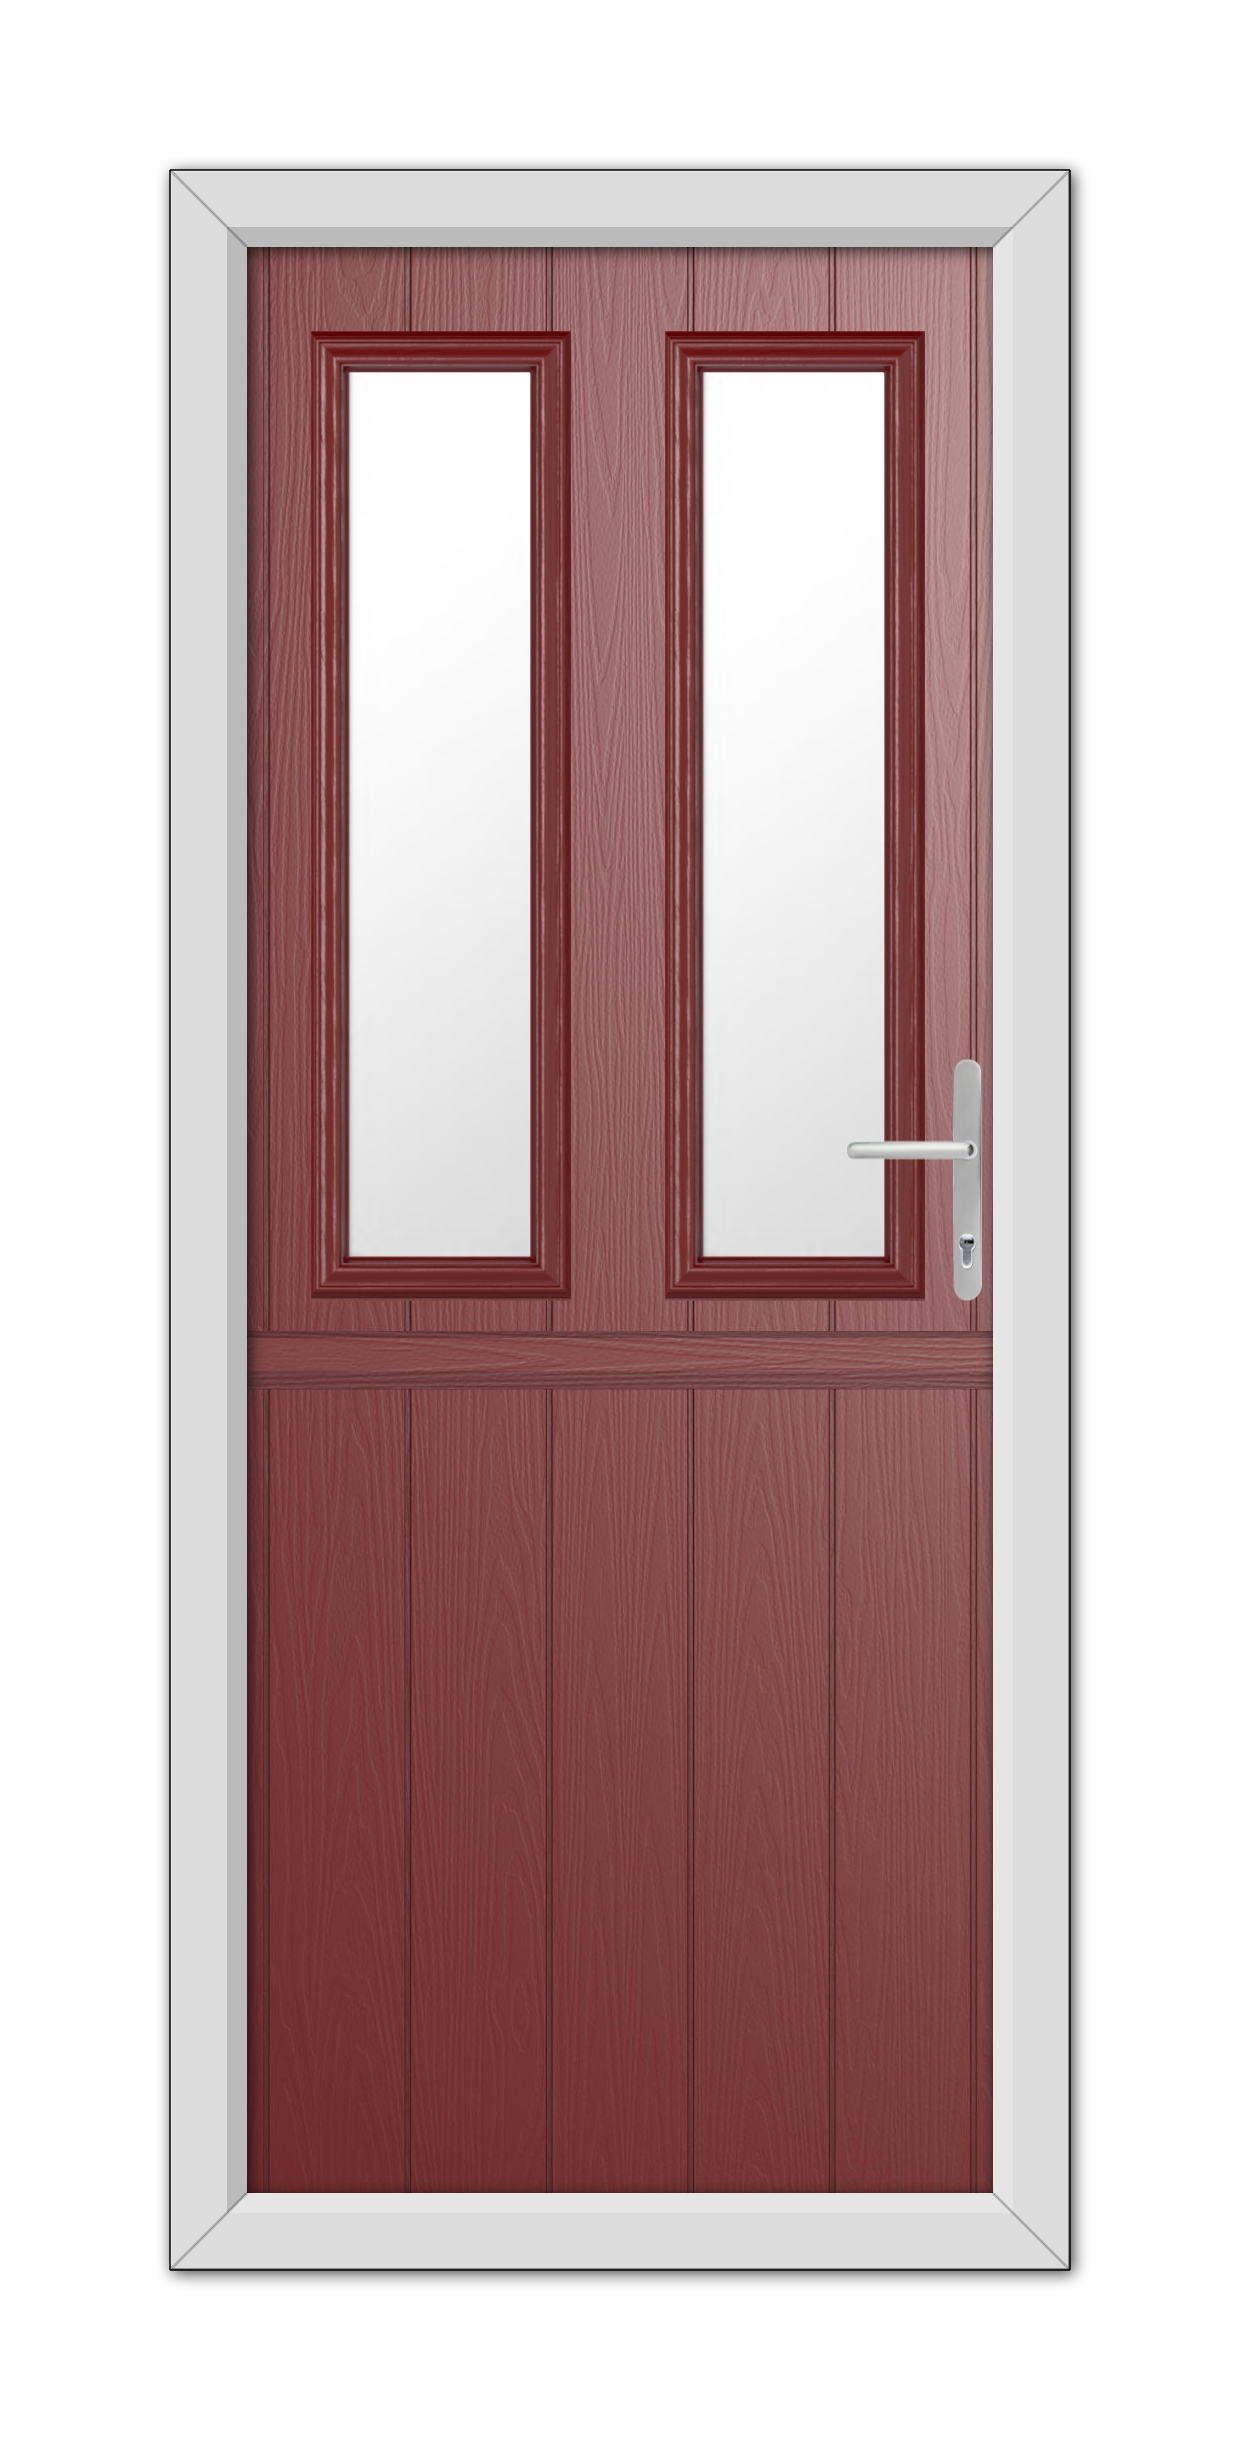 A modern Red Wellington Stable Composite Door 48mm Timber Core in a mahogany finish, featuring two vertical glass panels and a metallic handle, set in a white frame.